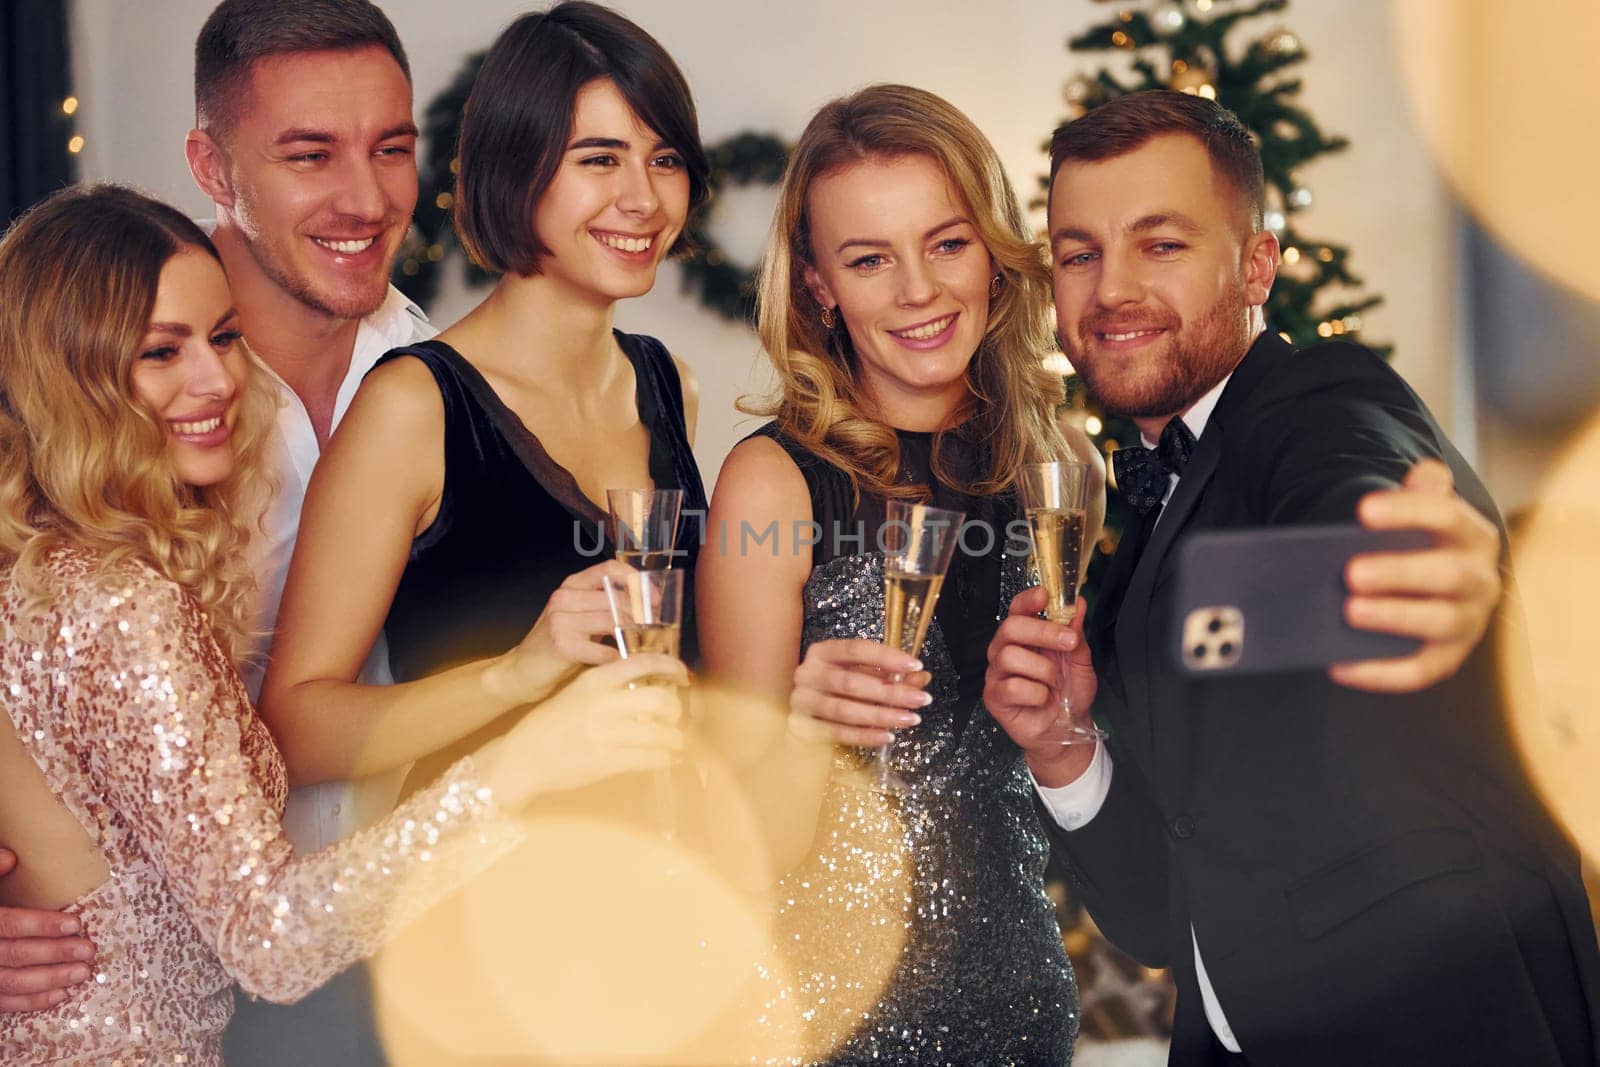 Making selfie. Group of people have a new year party indoors together by Standret